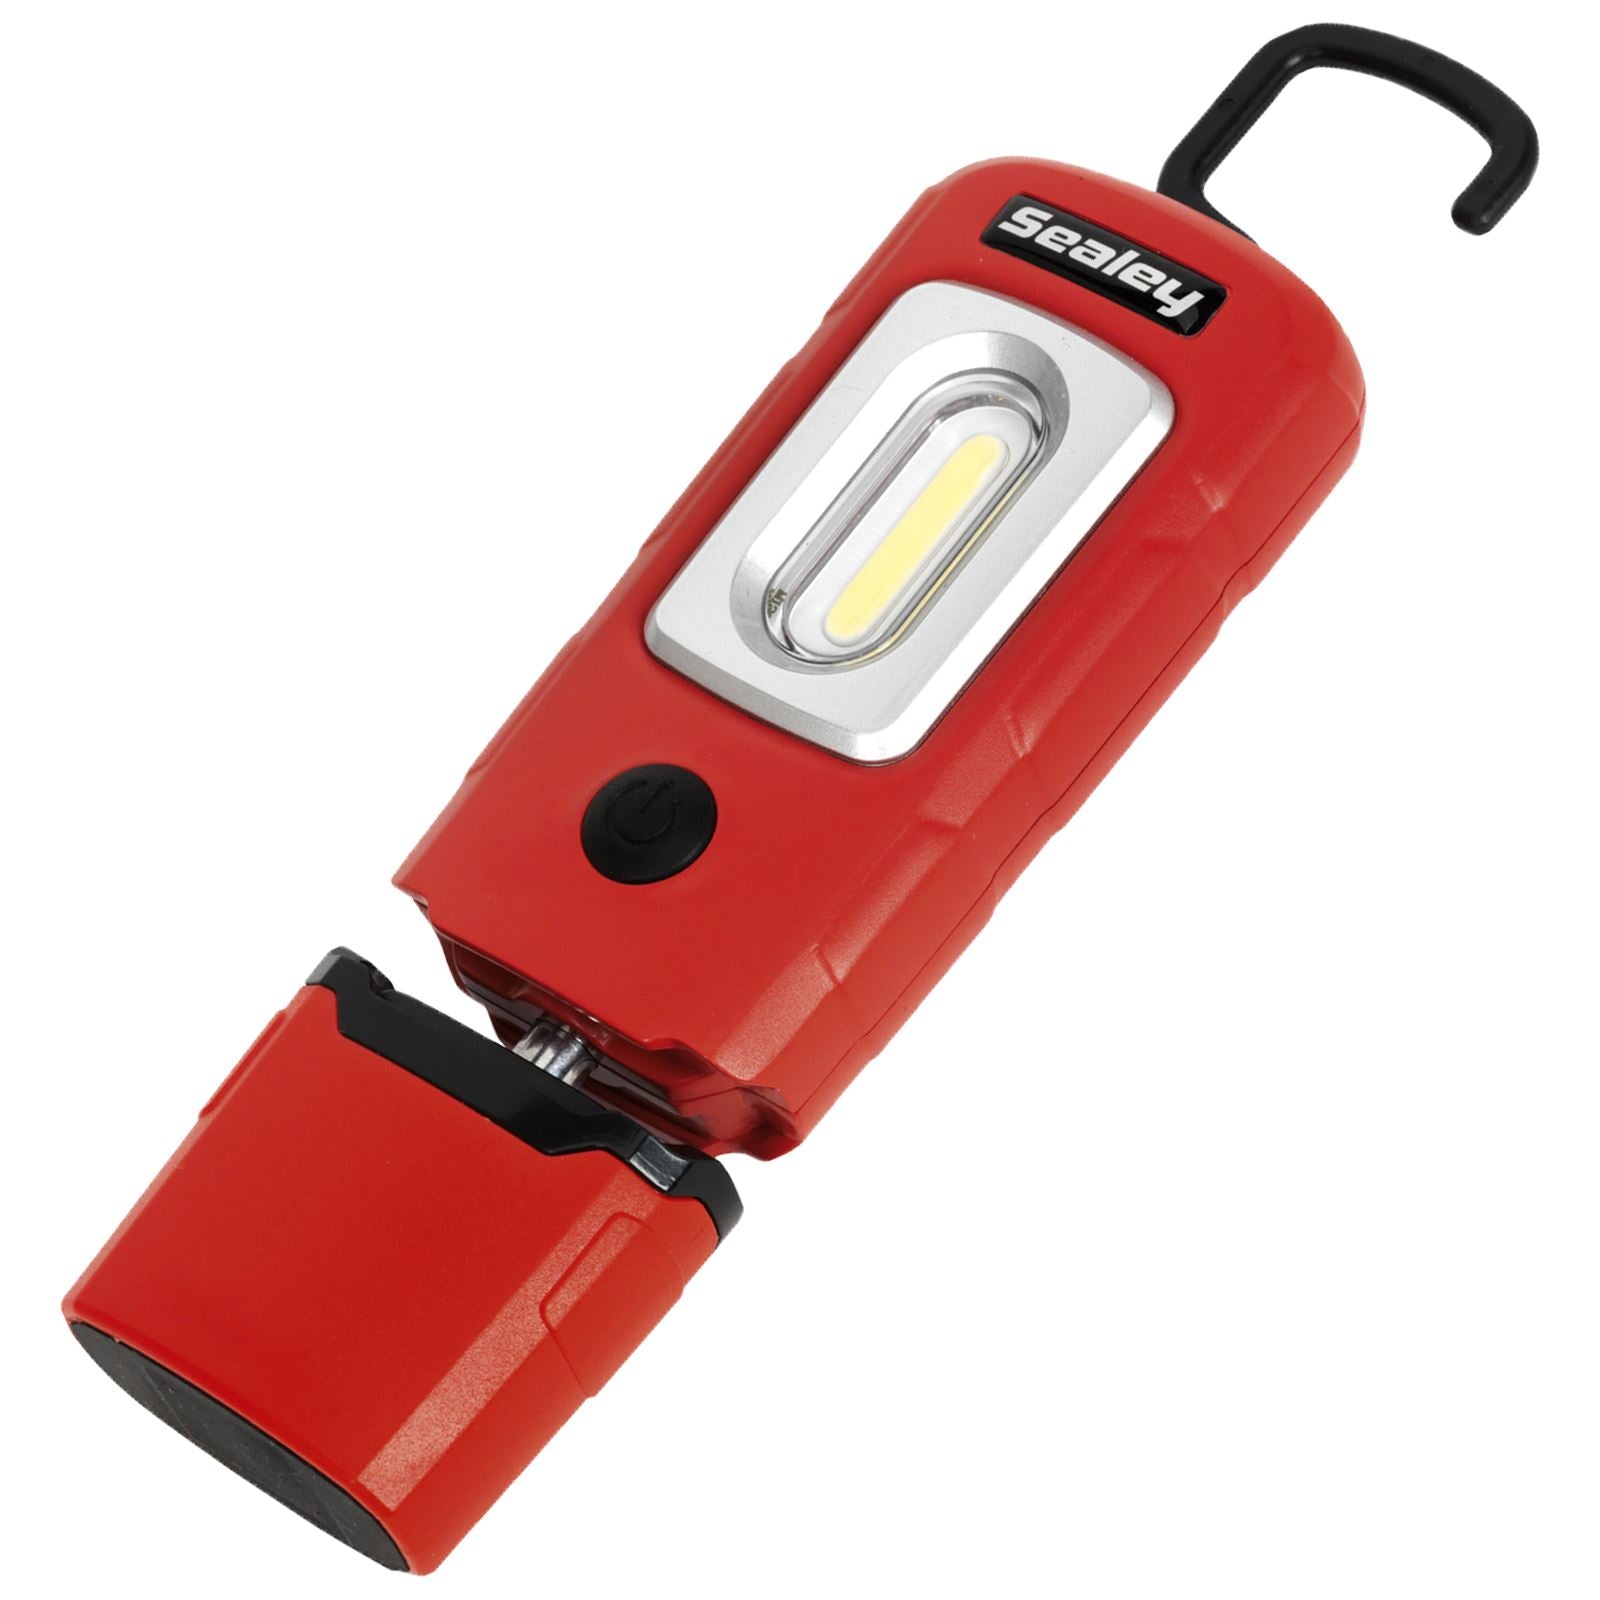 Sealey 360 COB LED Rechargeable Inspection Lamp 300 Lumens